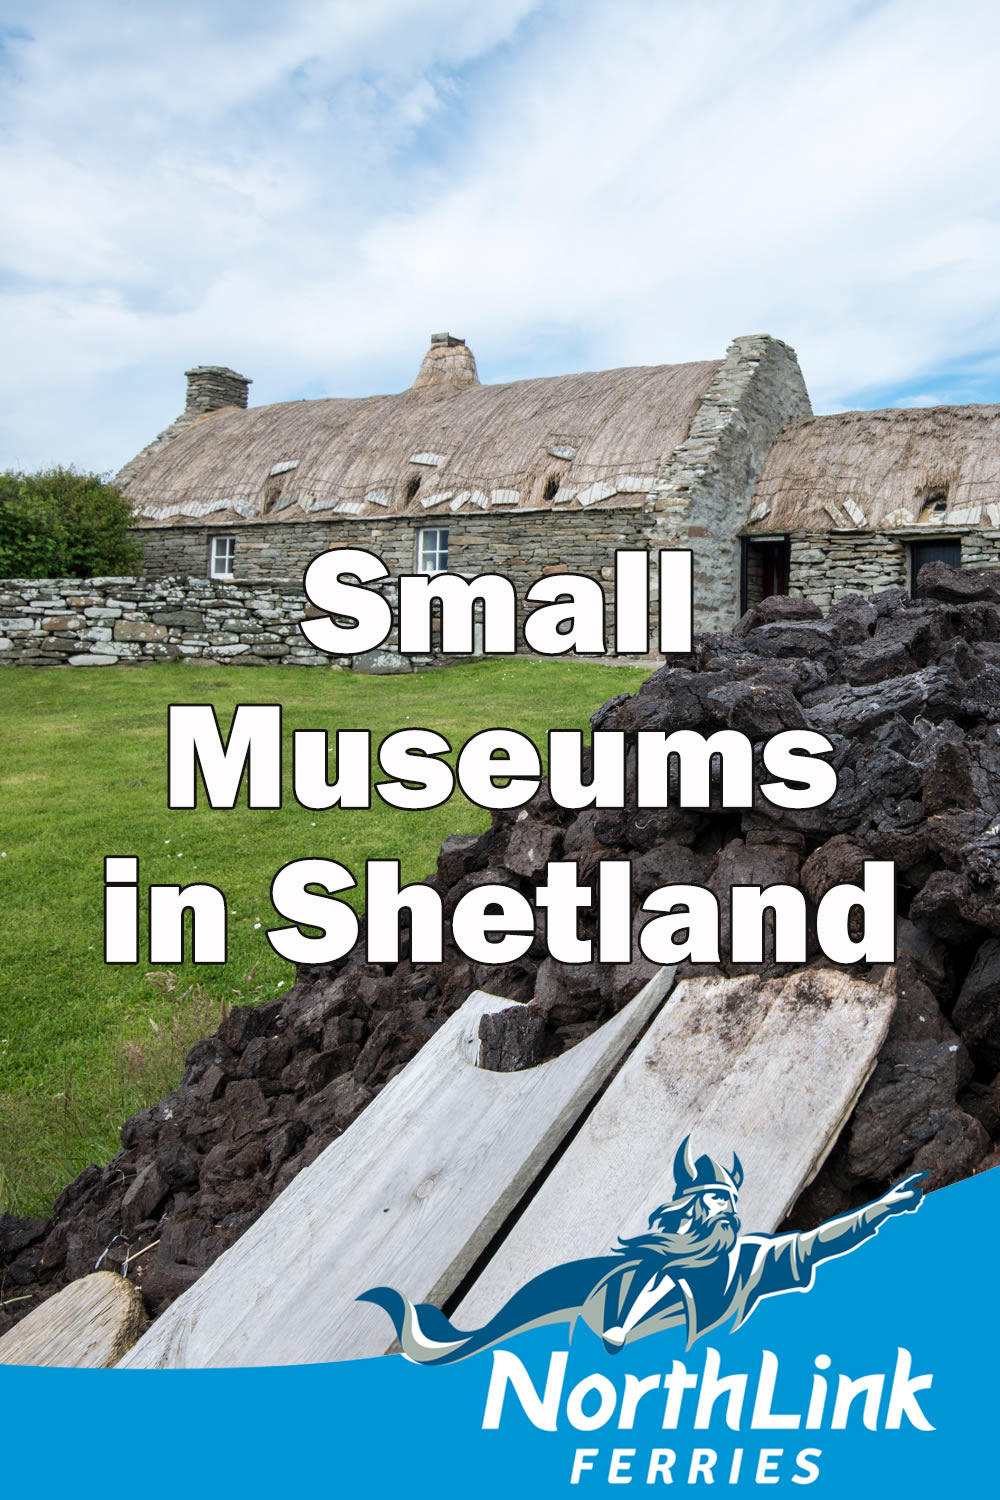 Small Museums in Shetland